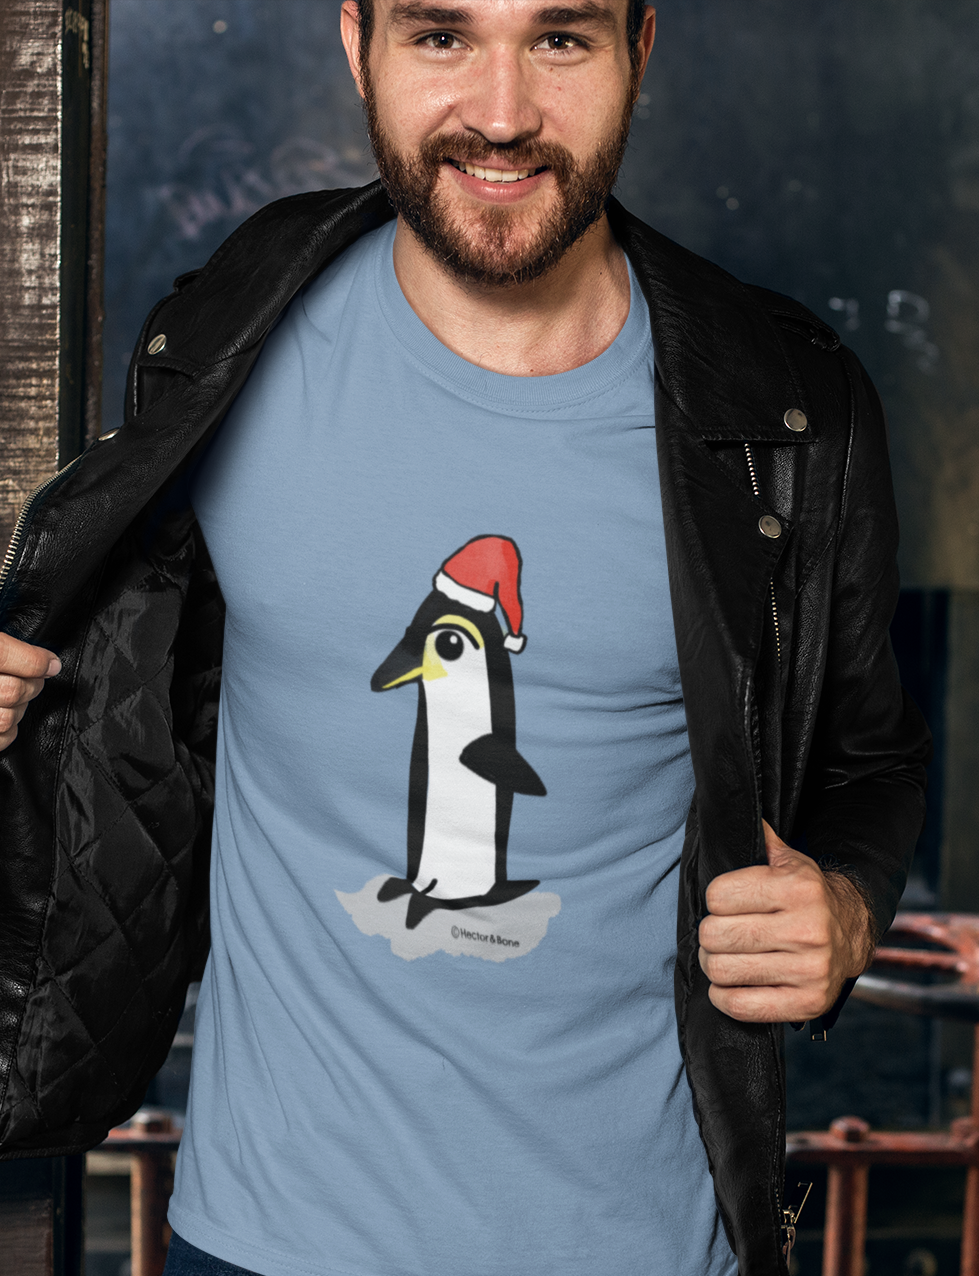 Christmas Penguin T-shirt - Young man at a Christmas party wearing a Santa Penguin cute Christmas T-shirt in mid heather blue colour illustrated design by Hector and Bone on a Vegan cotton t-shirt